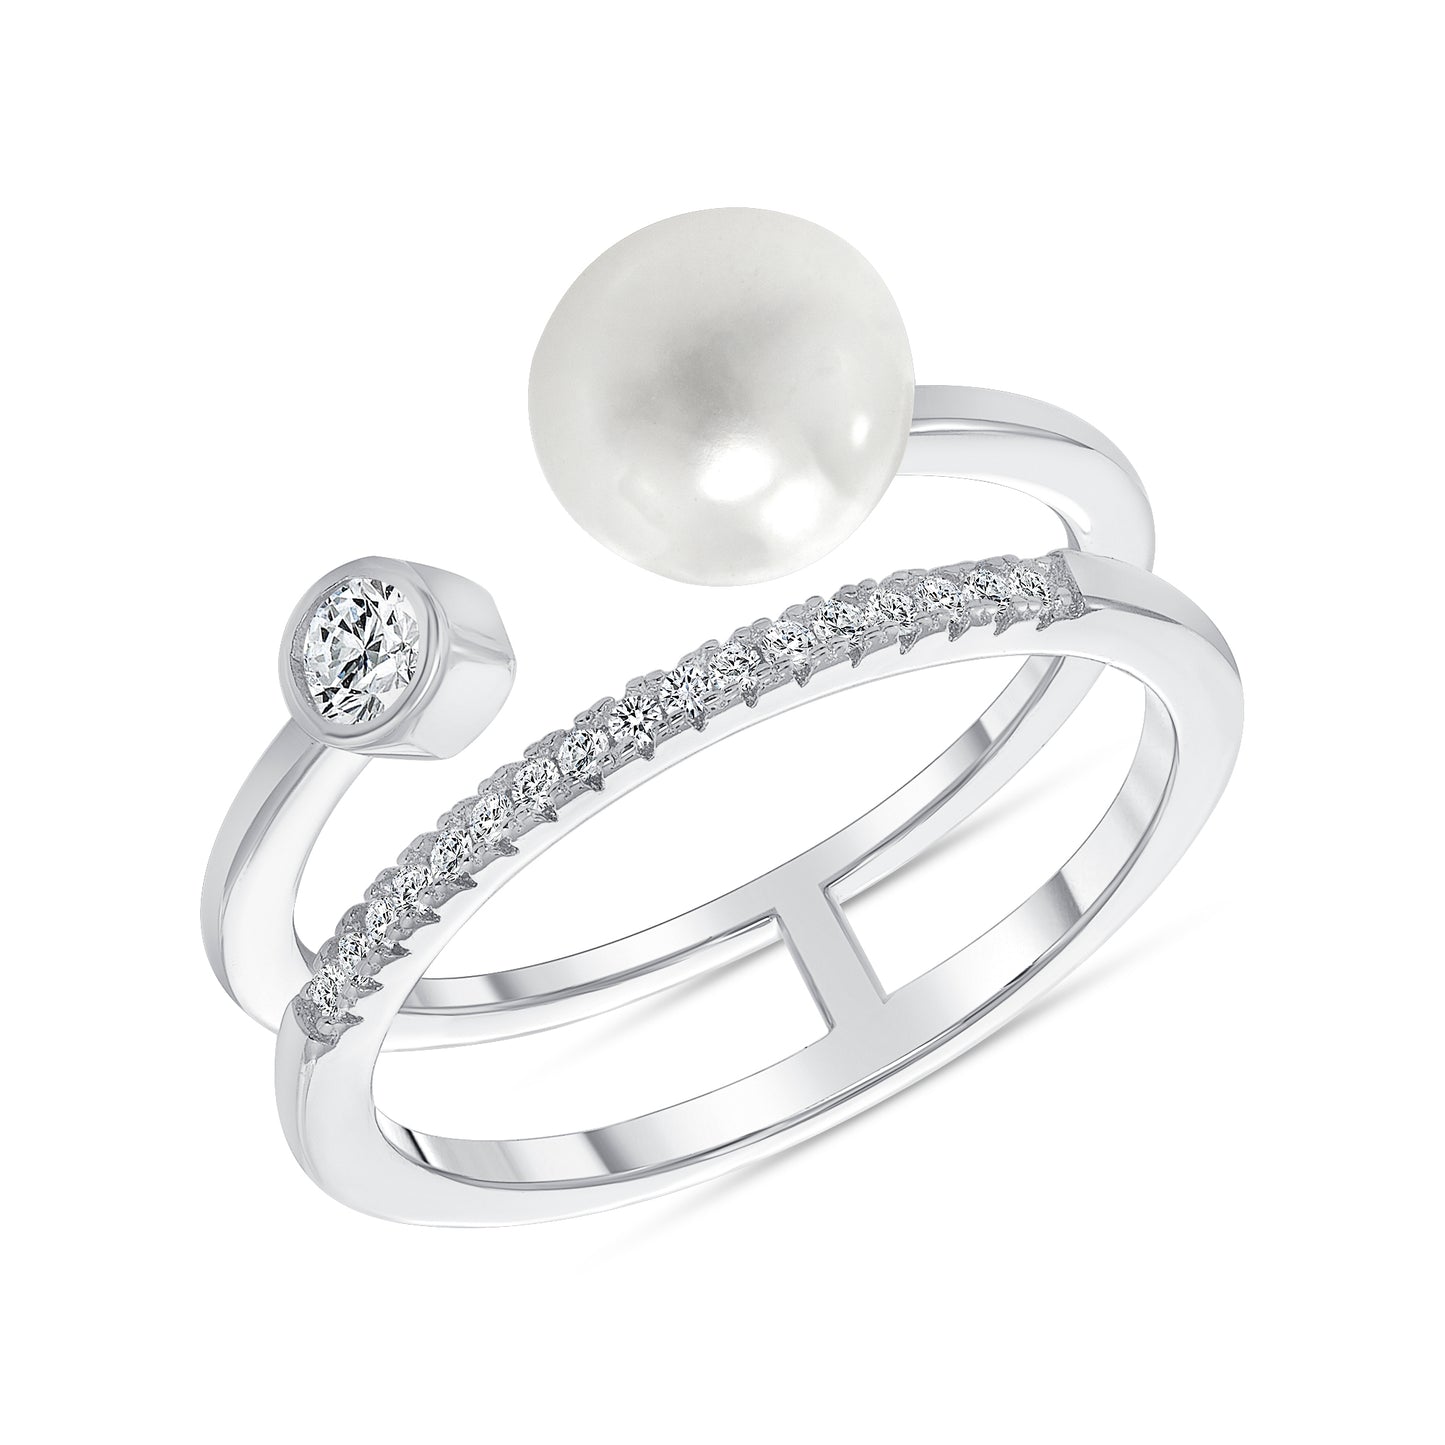 Silver 925 Rhodium Plated Two Line Pearl & Bezel Cubic Zirconia Ring. GR9281B